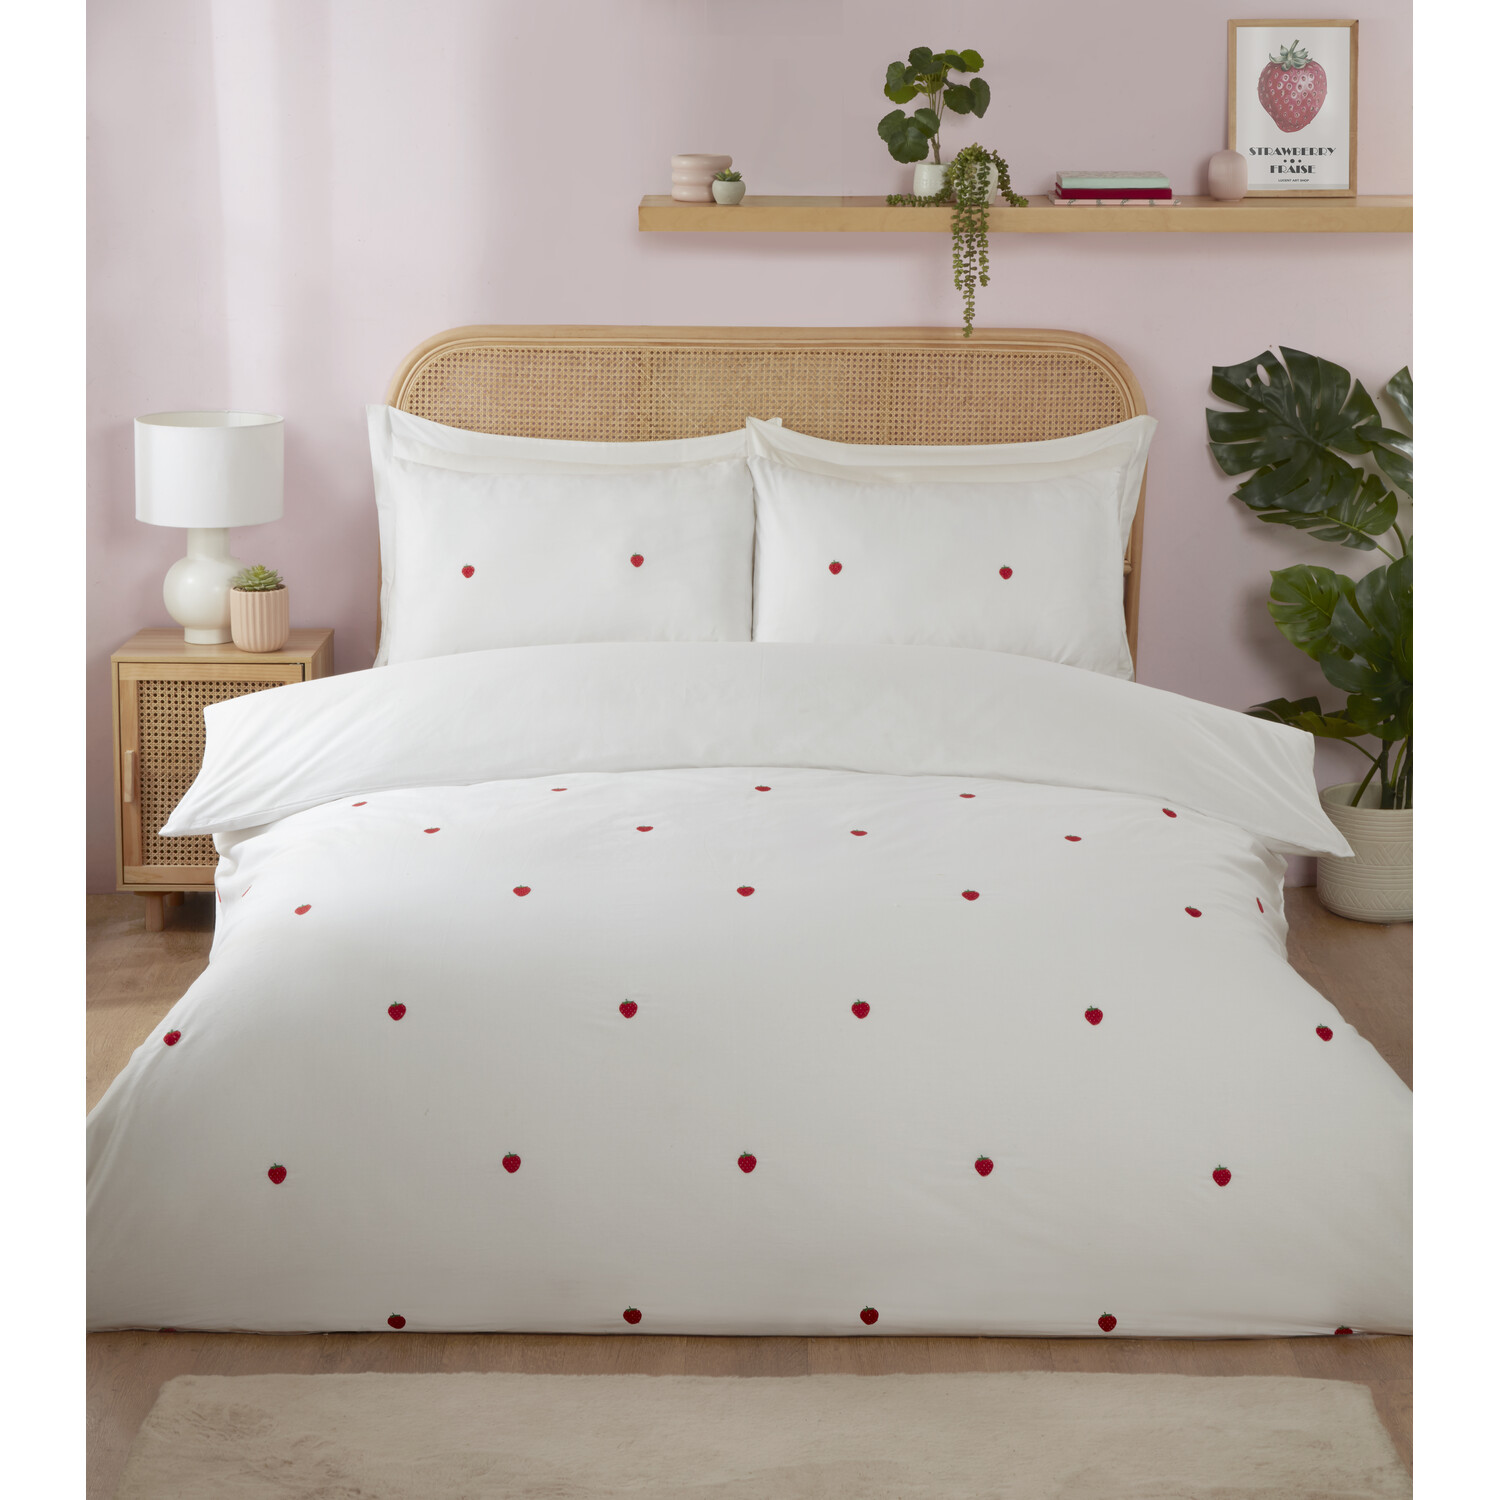 Strawberry Embroidered Duvet Cover and Pillowcase Set - White / Single Image